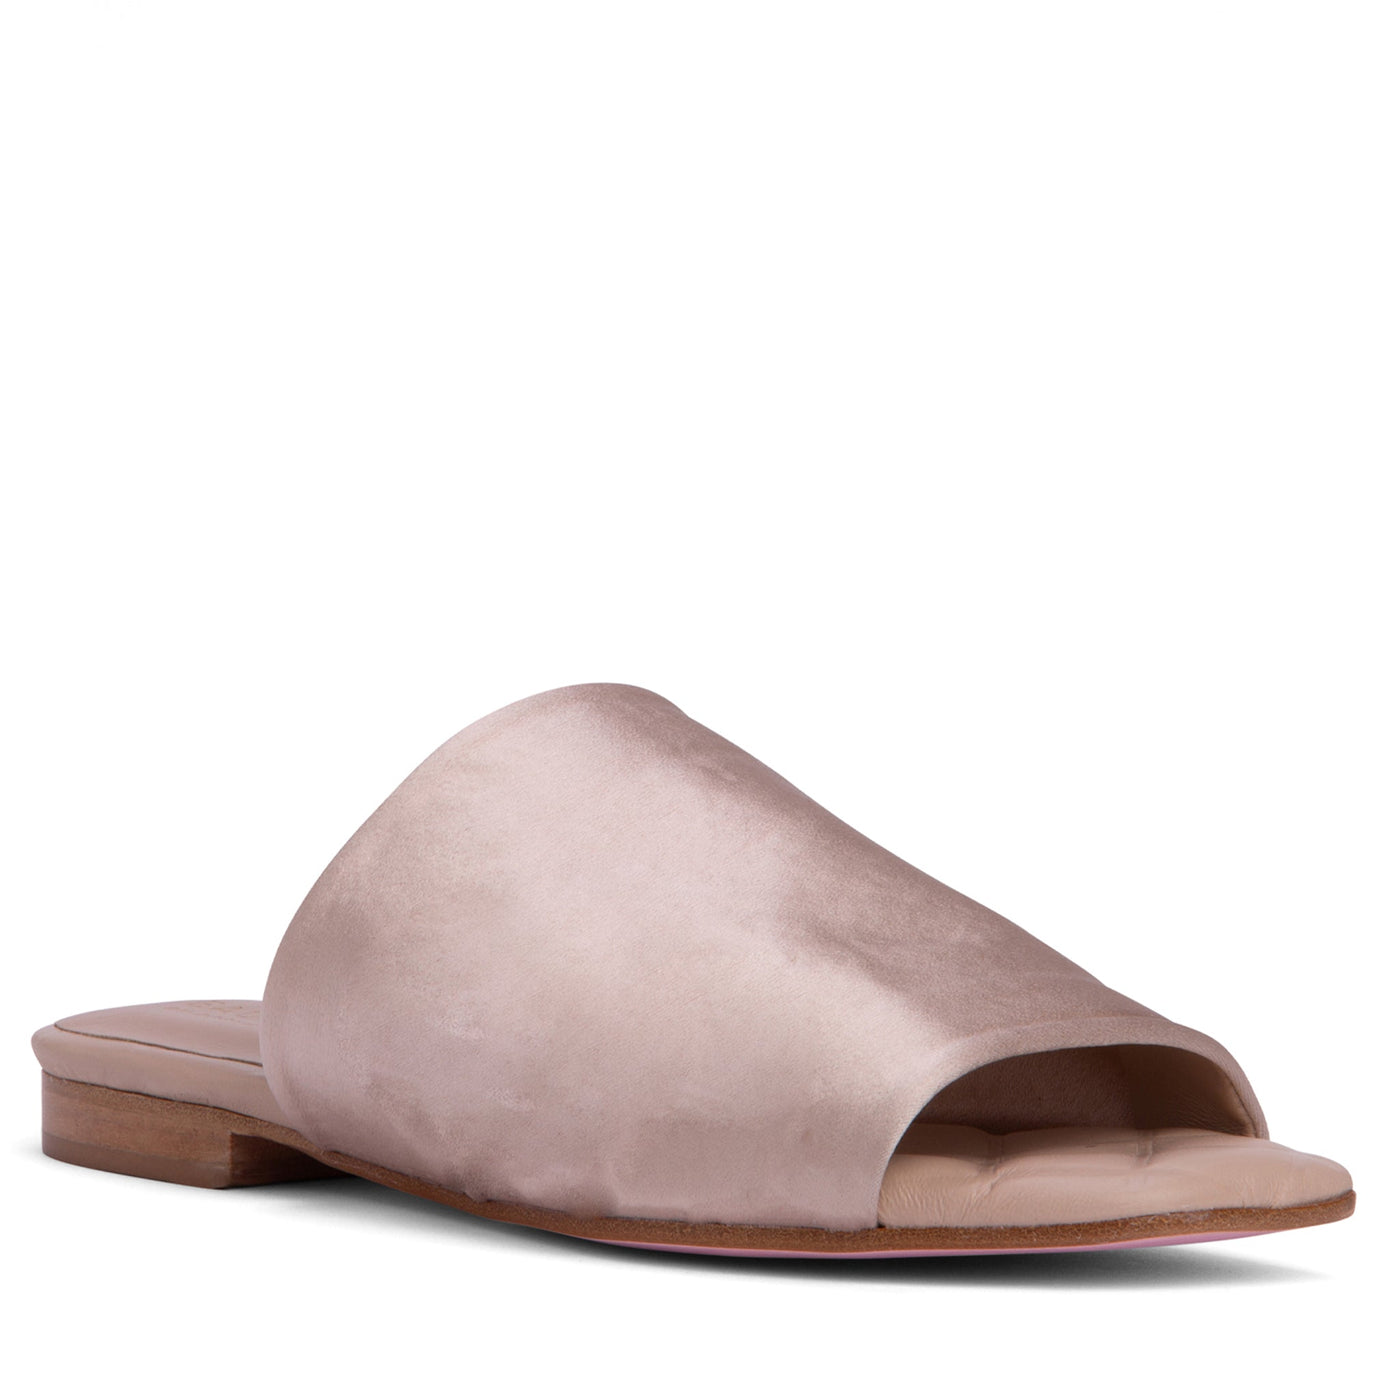 Comfortable Beige Flat Sandal - Nude Pink Stretch